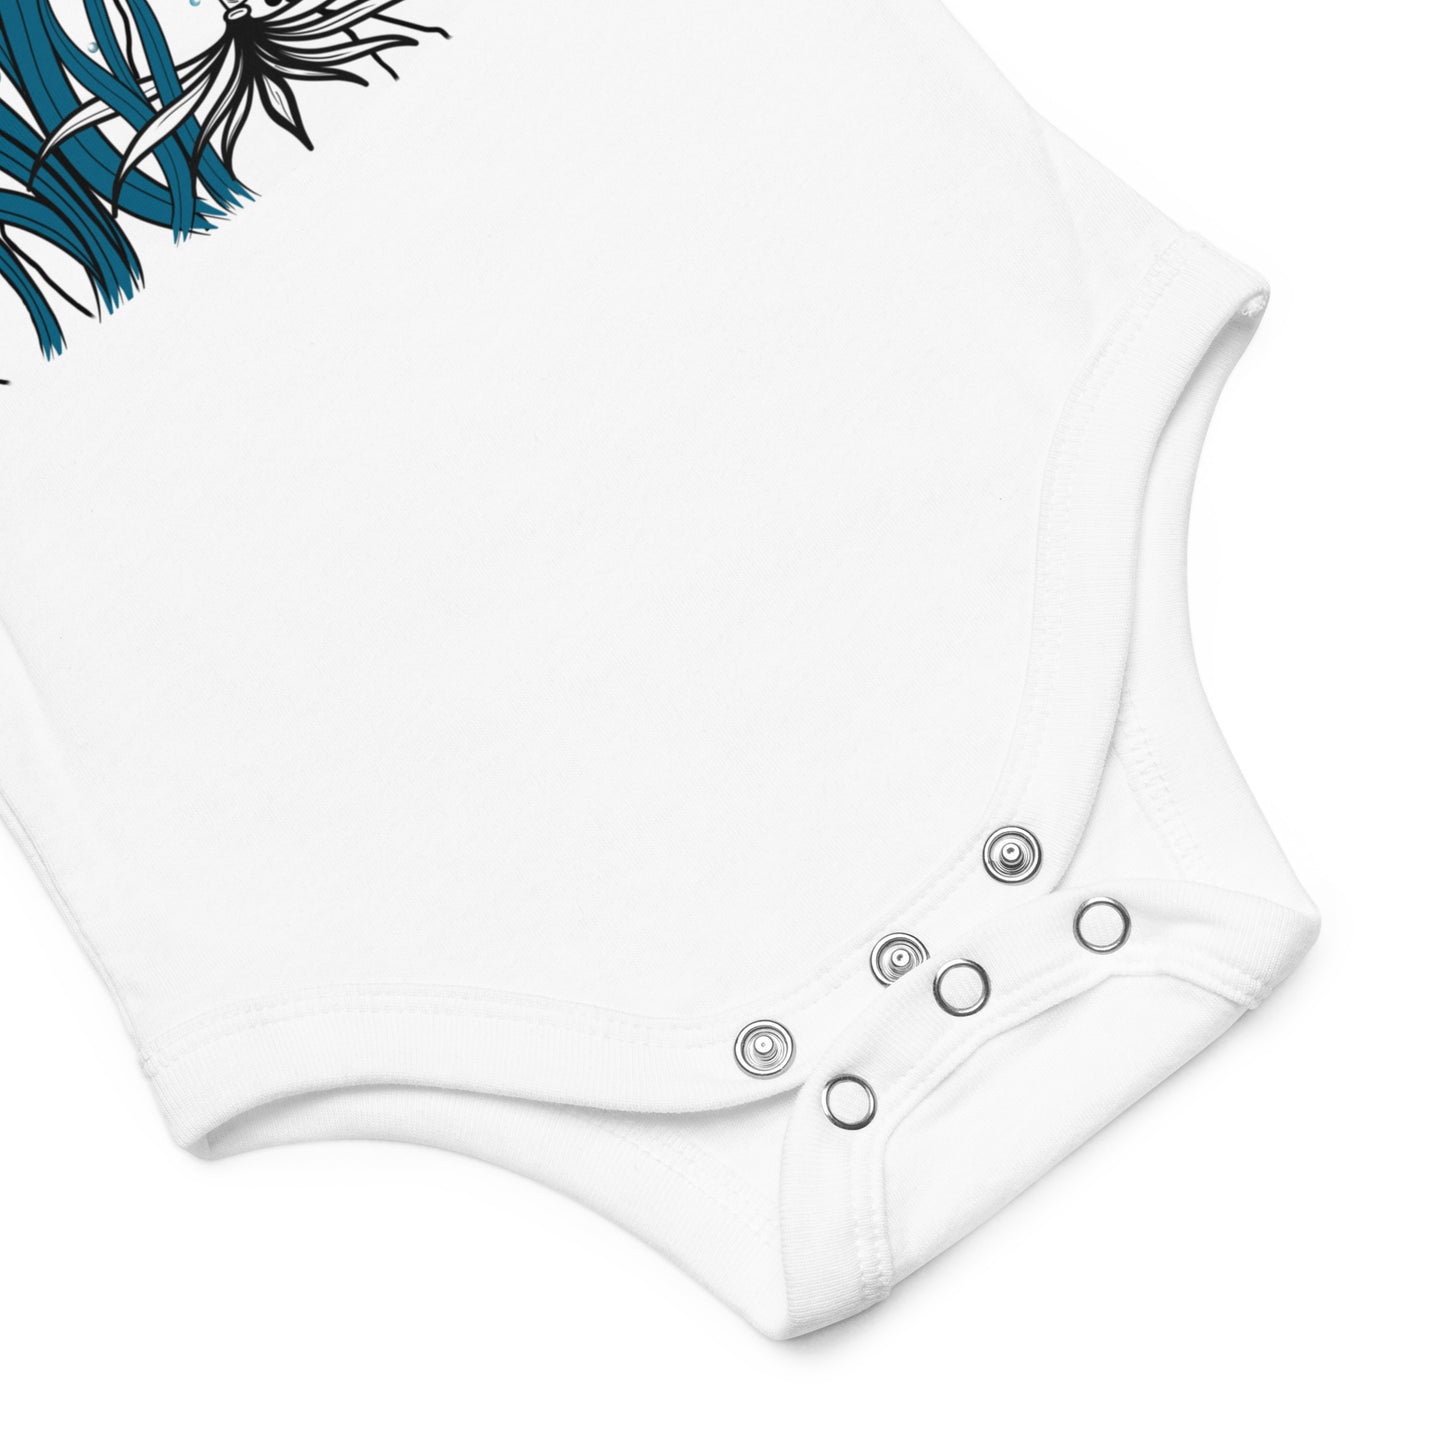 Under the Sea Baby One Piece